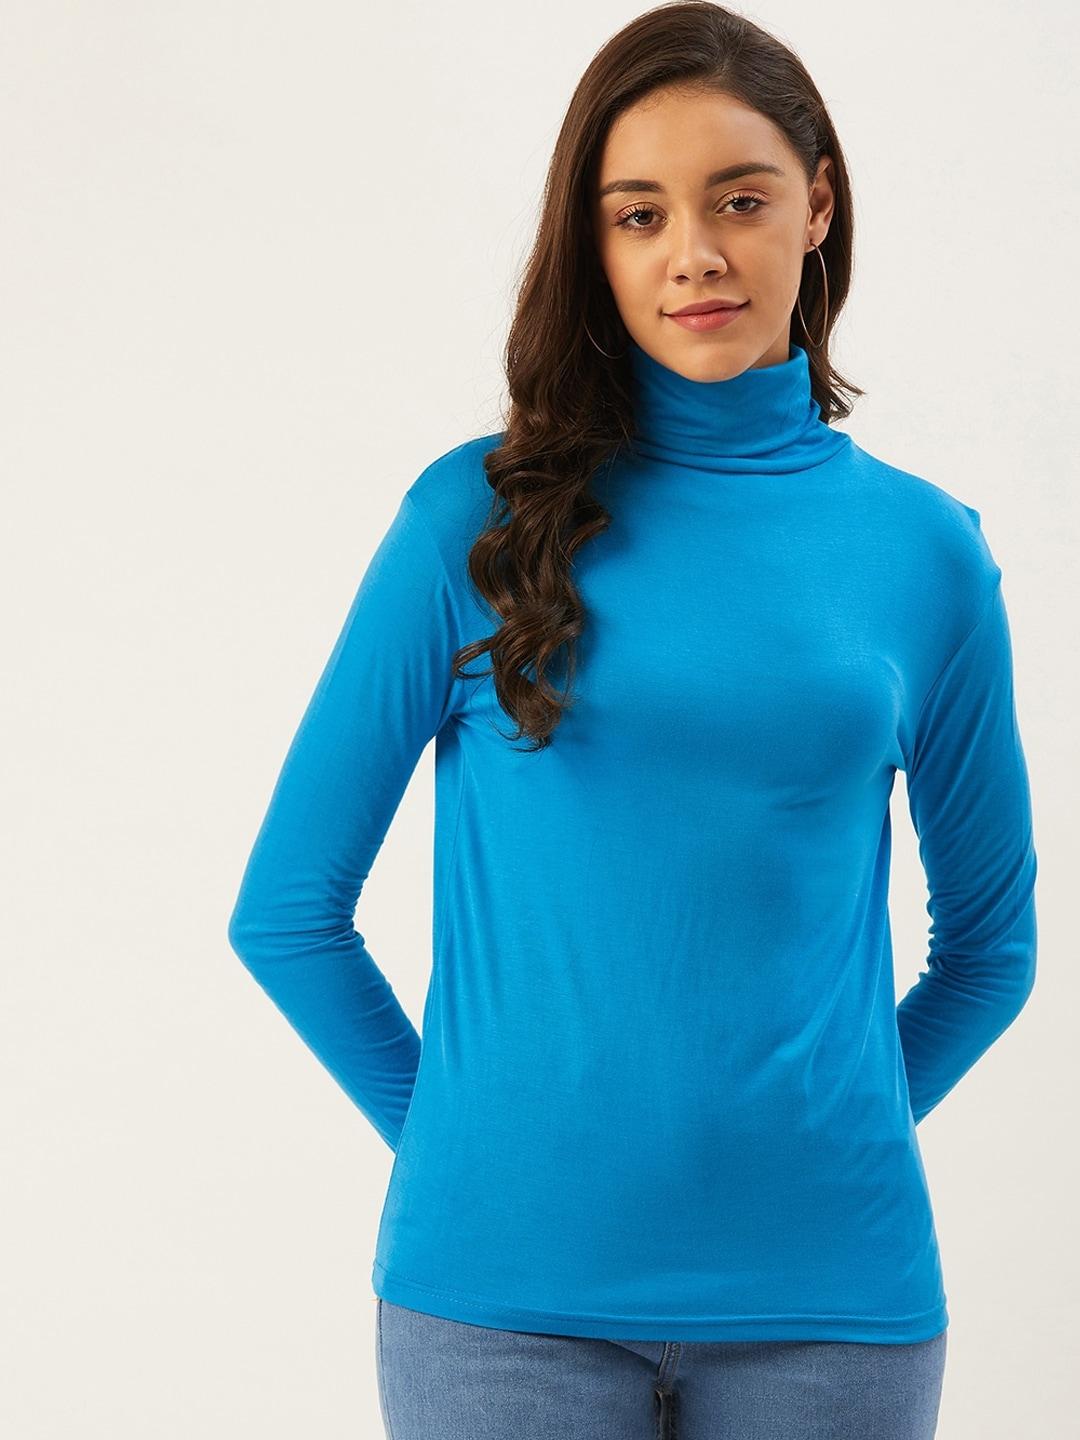 anvi-be-yourself-women-blue-solid-fitted-top